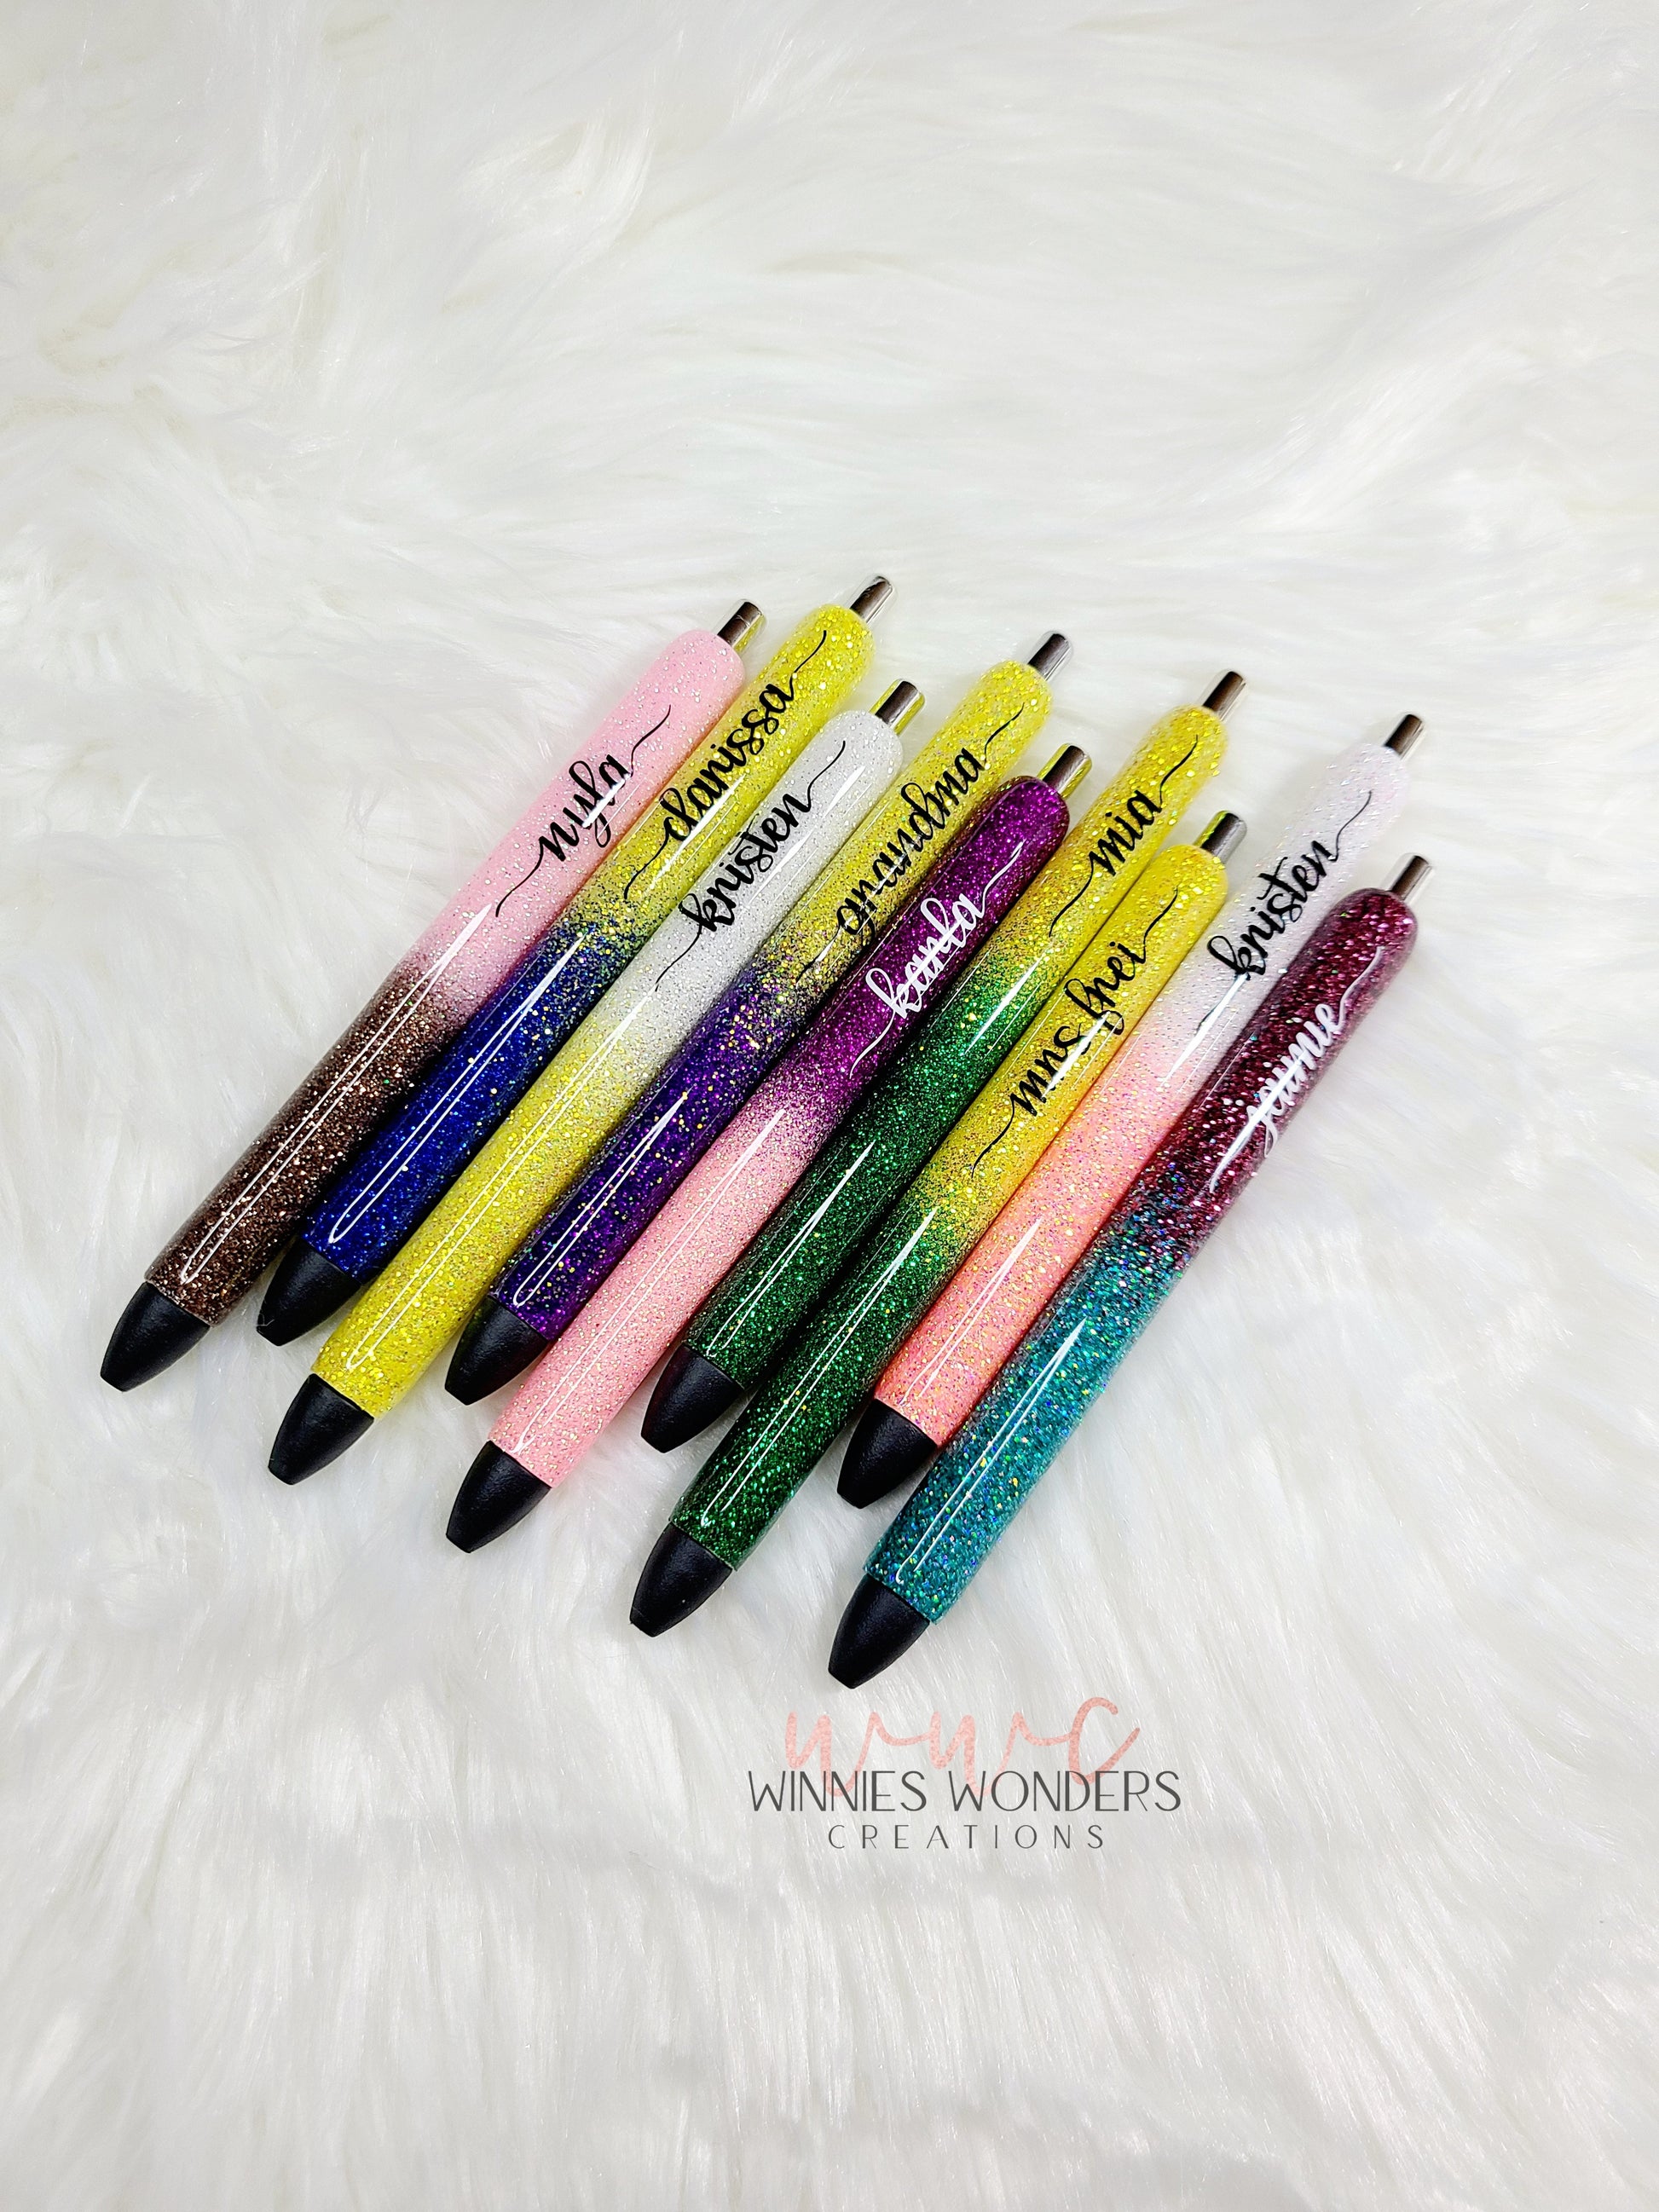 Home & Living :: Office & Organization :: Pens, Pencils & Writing ::  Glitter Ombre Pens / Personalized Glitter Pens / Teacher Pens / Gift Pens /  Glitter Gift Pens / Custom Inkjoy Pens